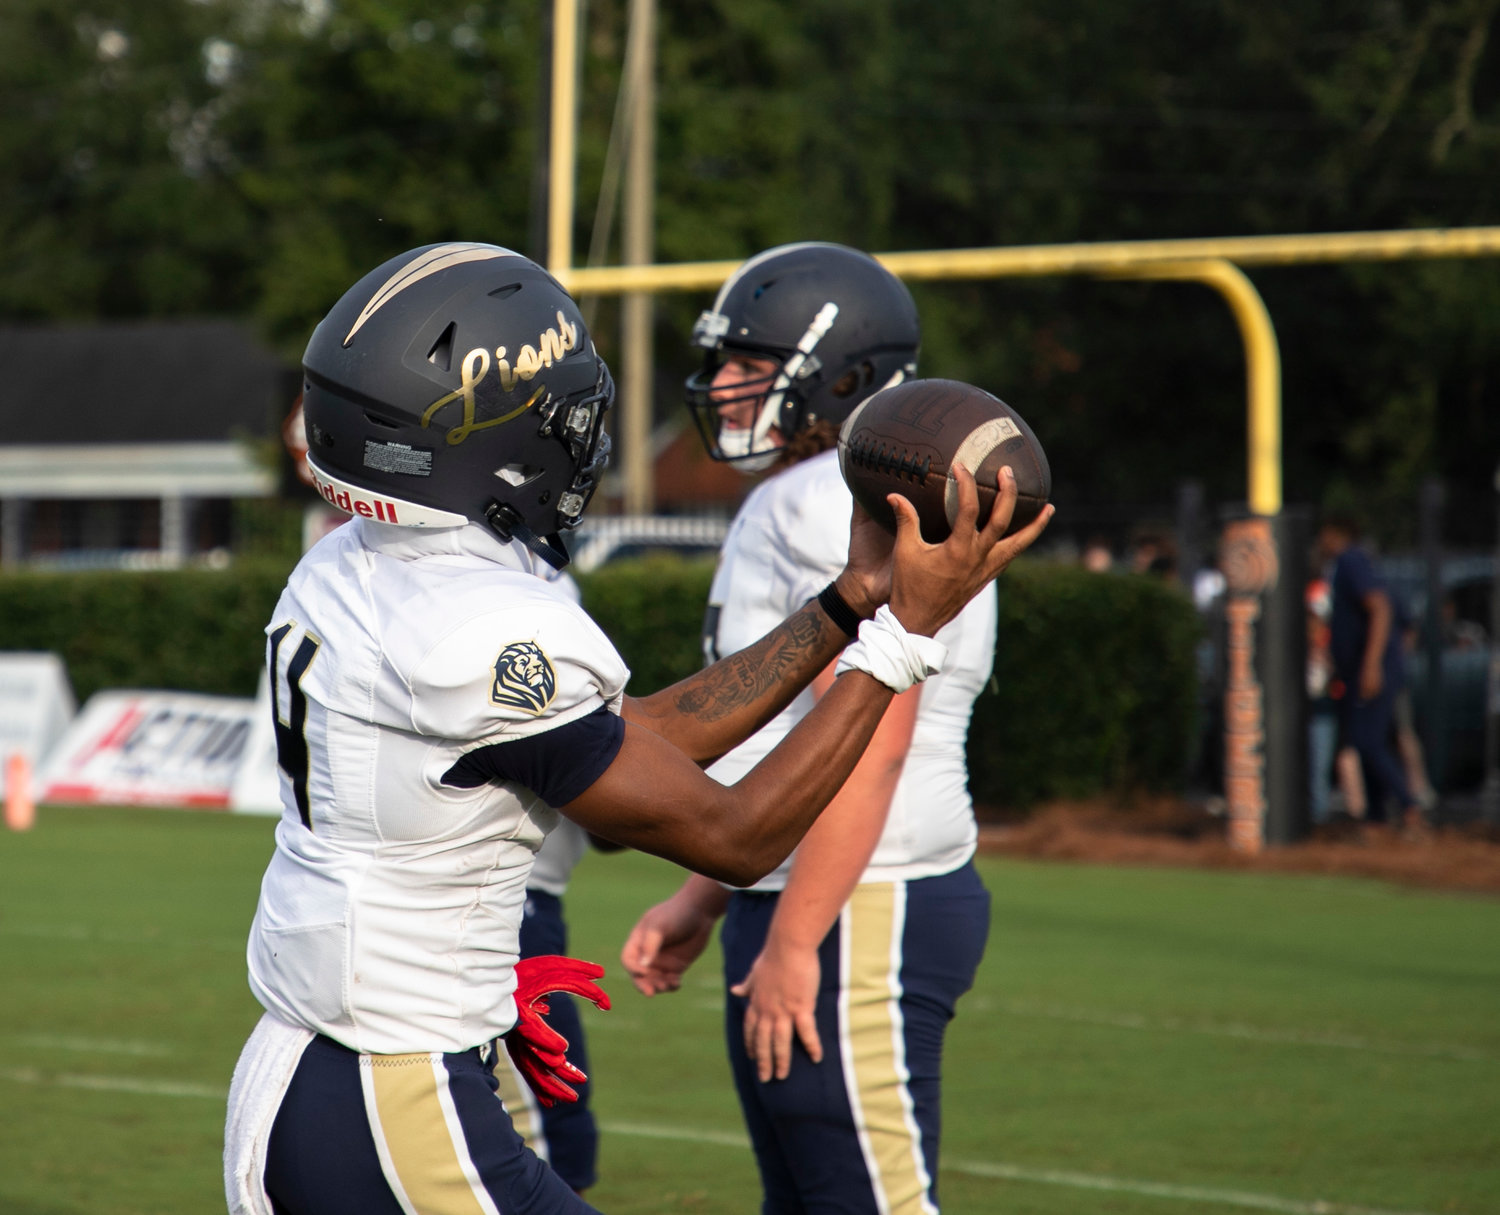 Foley receiver Makai Mitchell looks in a pass during warmups before the Lions’ non-region game against the Baldwin County Tigers Aug. 26 in Bay Minette. Foley hosts the No. 3 Saraland Spartans this Friday in another non-region battle.